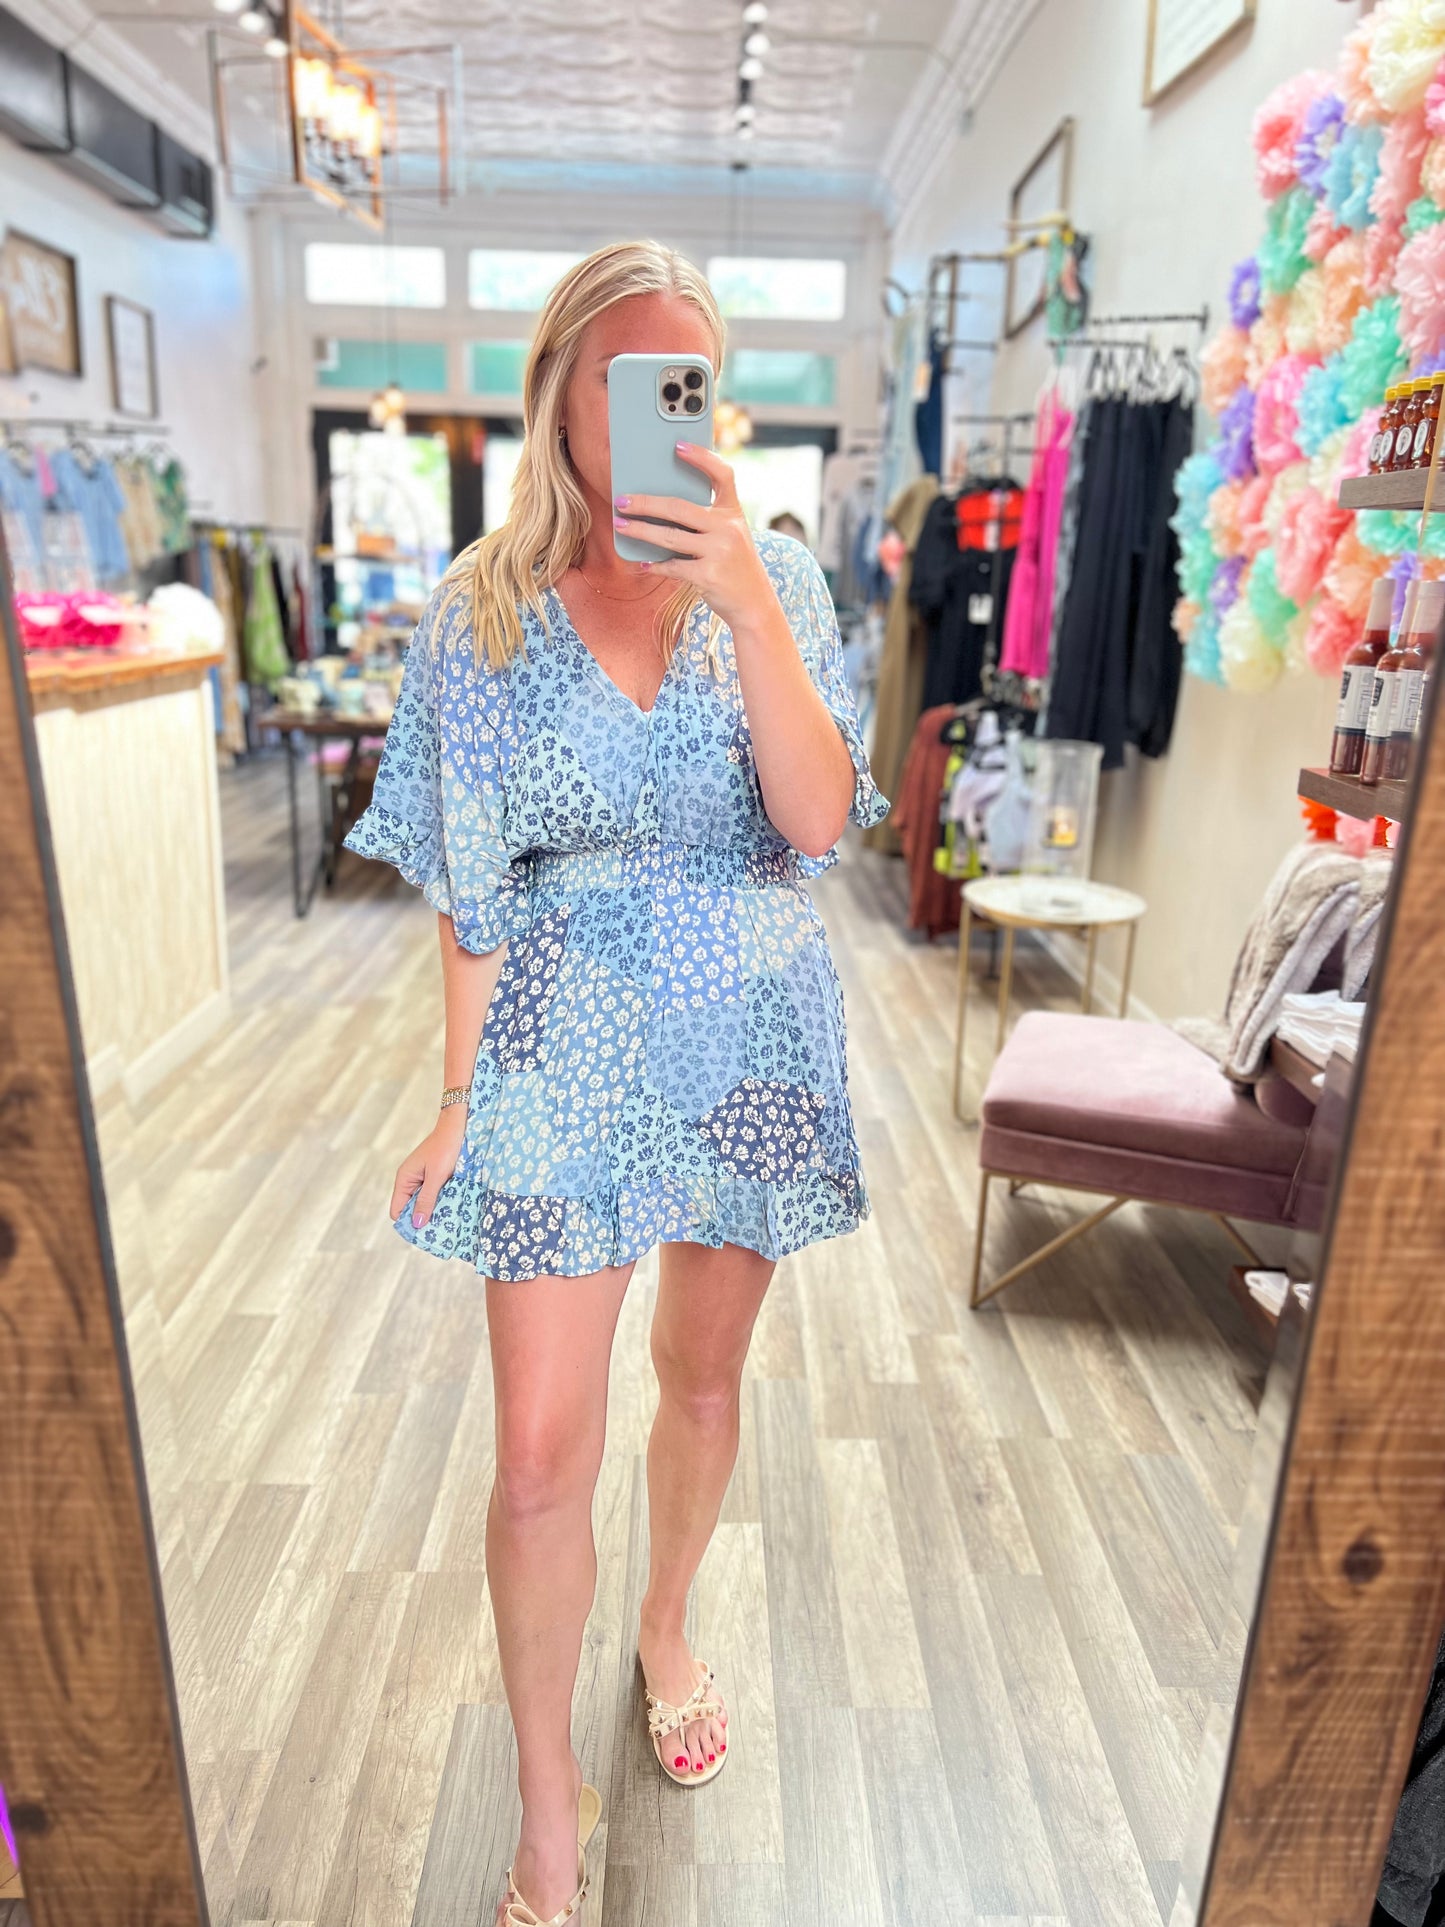 Summer Days Are Here! Romper